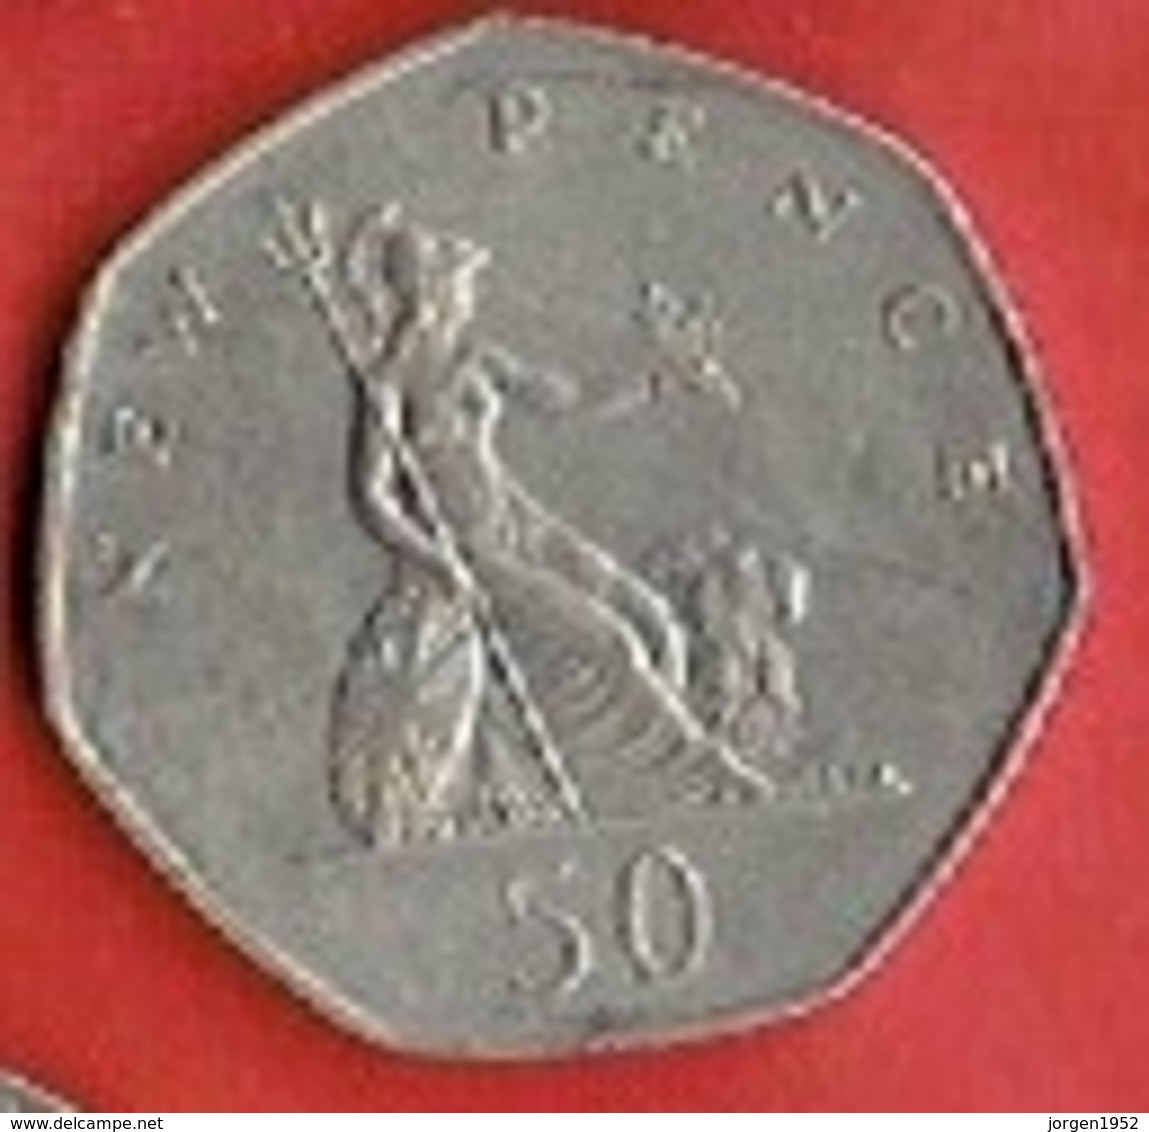 GREAT BRITAIN  # 50 New Pence - Elizabeth II   FROM 1976 - 50 Pence